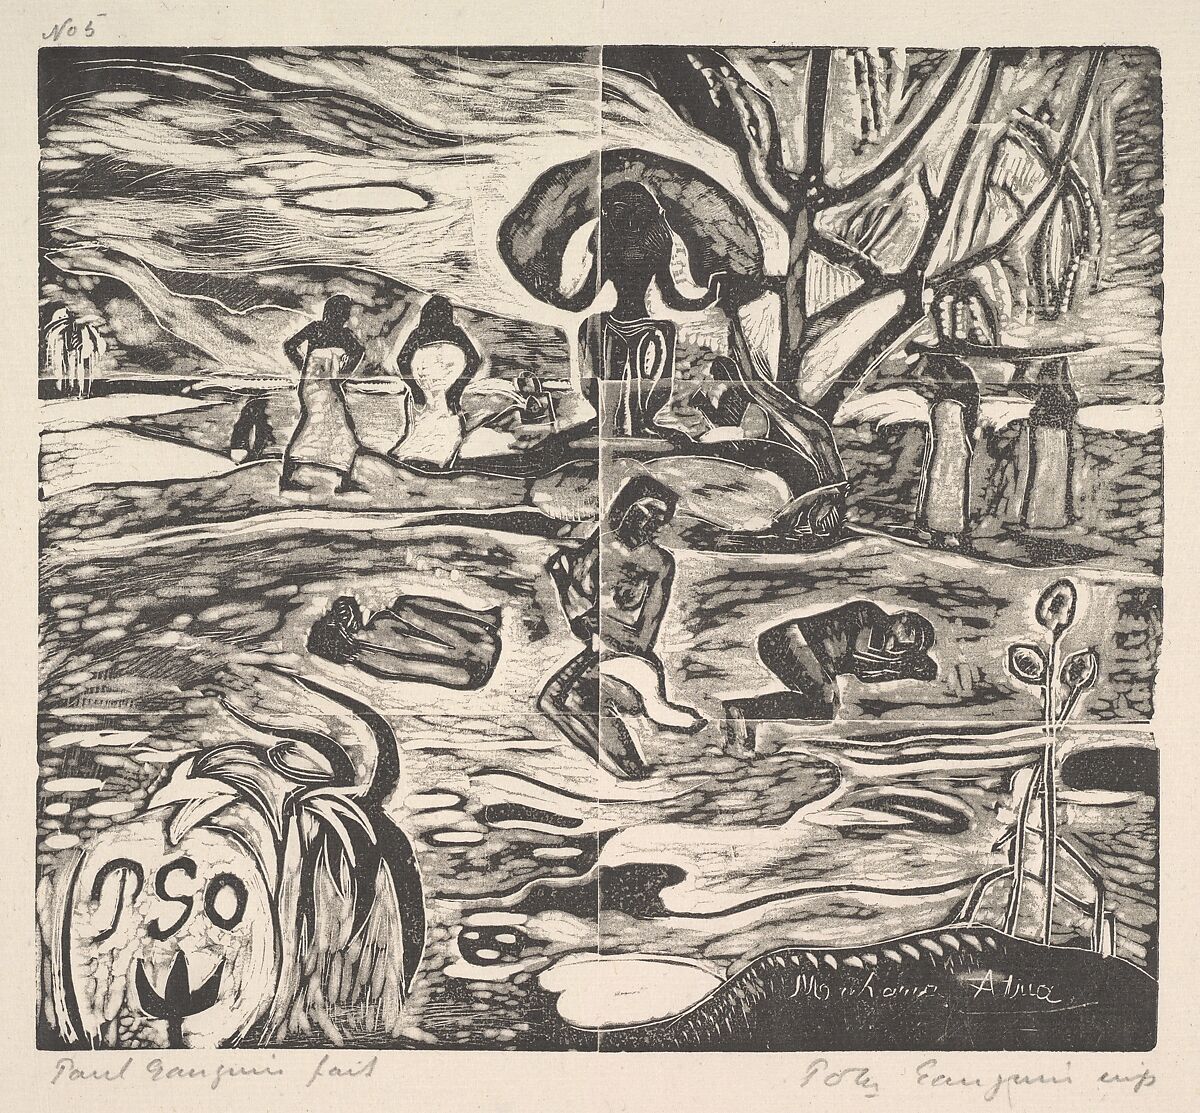 The Day of God, Paul Gauguin (French, Paris 1848–1903 Atuona, Hiva Oa, Marquesas Islands), Woodcut on china paper; edition in black ink on china paper 